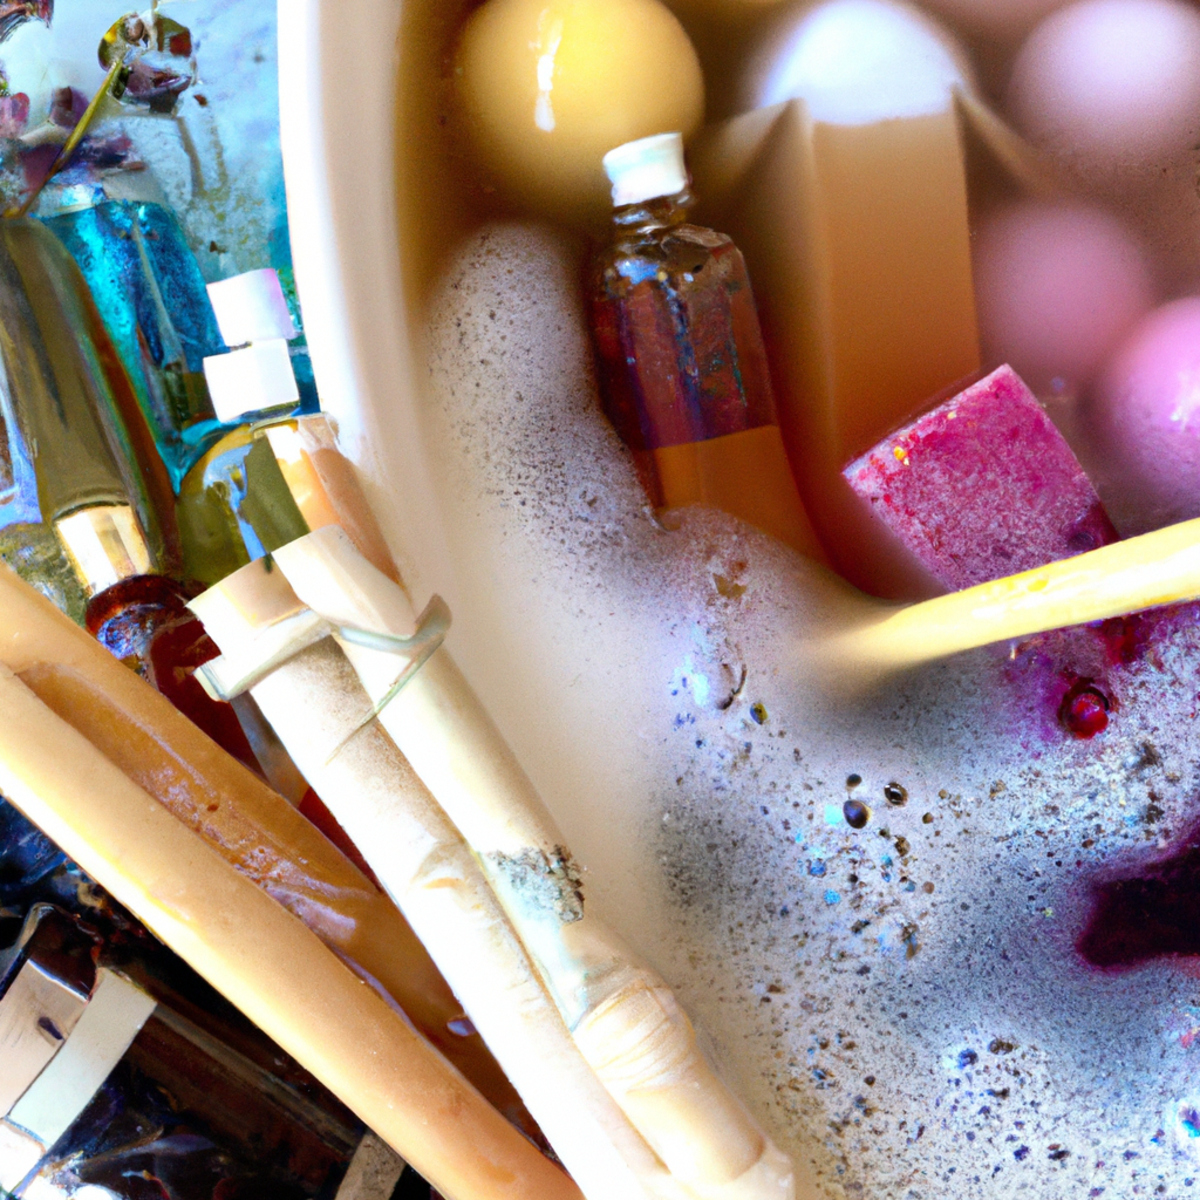 Luxurious bath and body treats in a beautifully arranged display, inviting you to indulge in self-care.